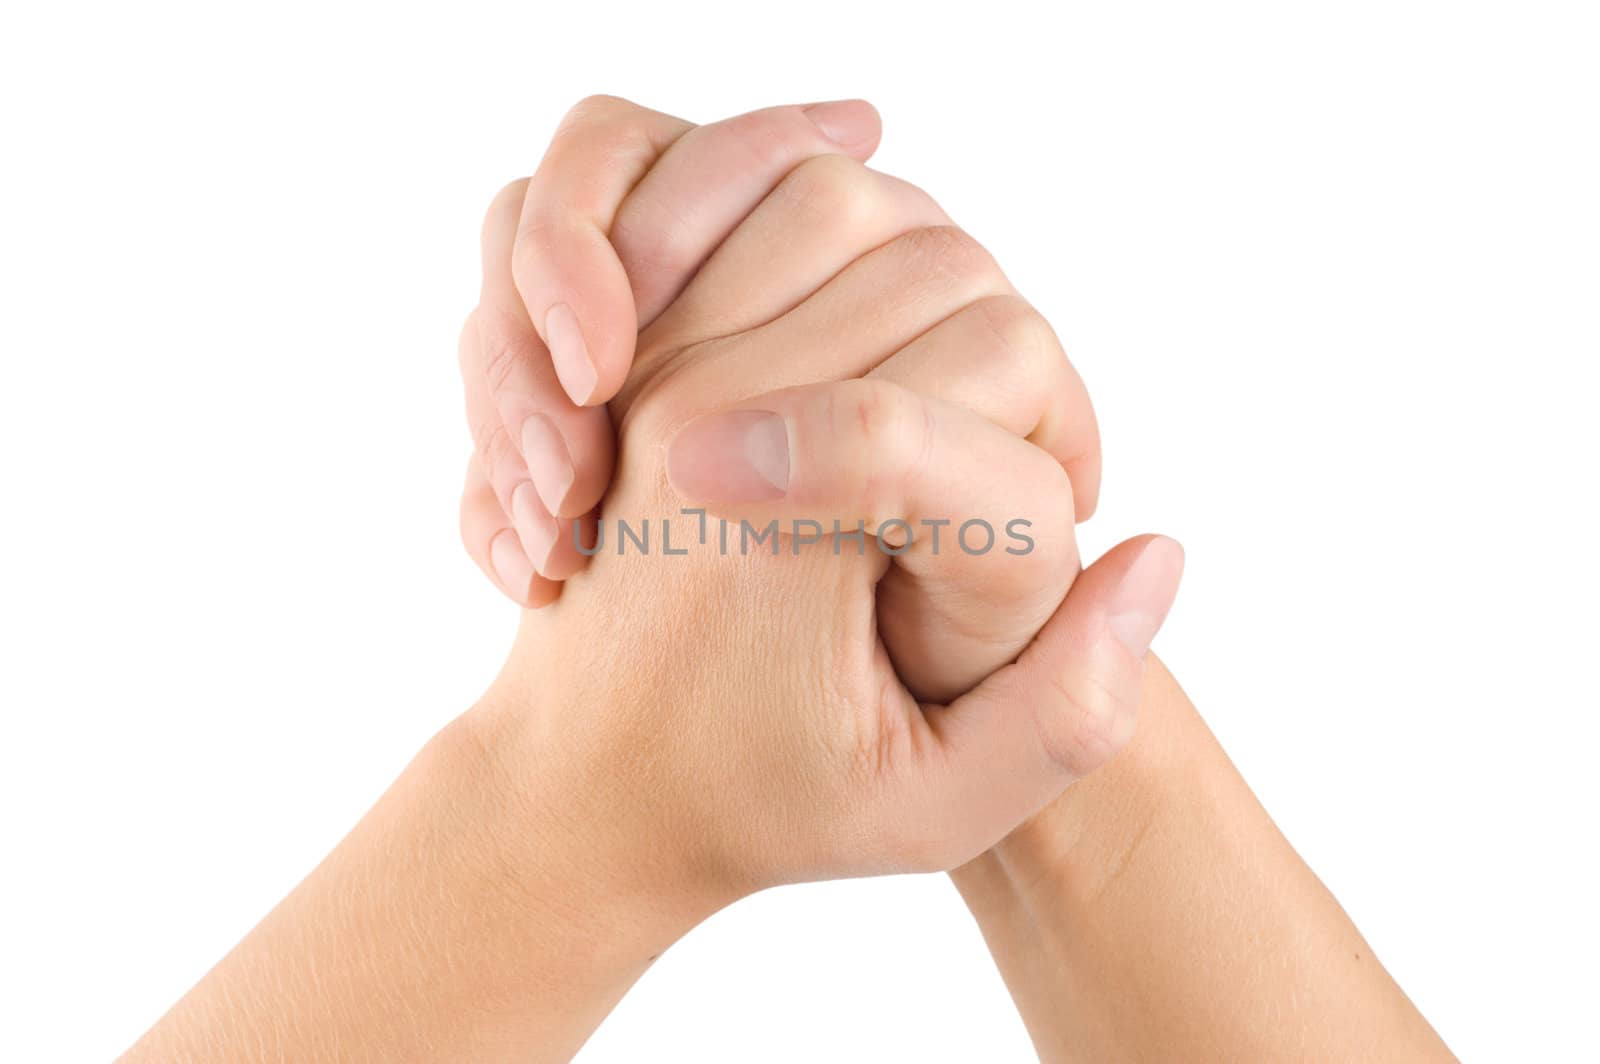 Hands isolated on white background